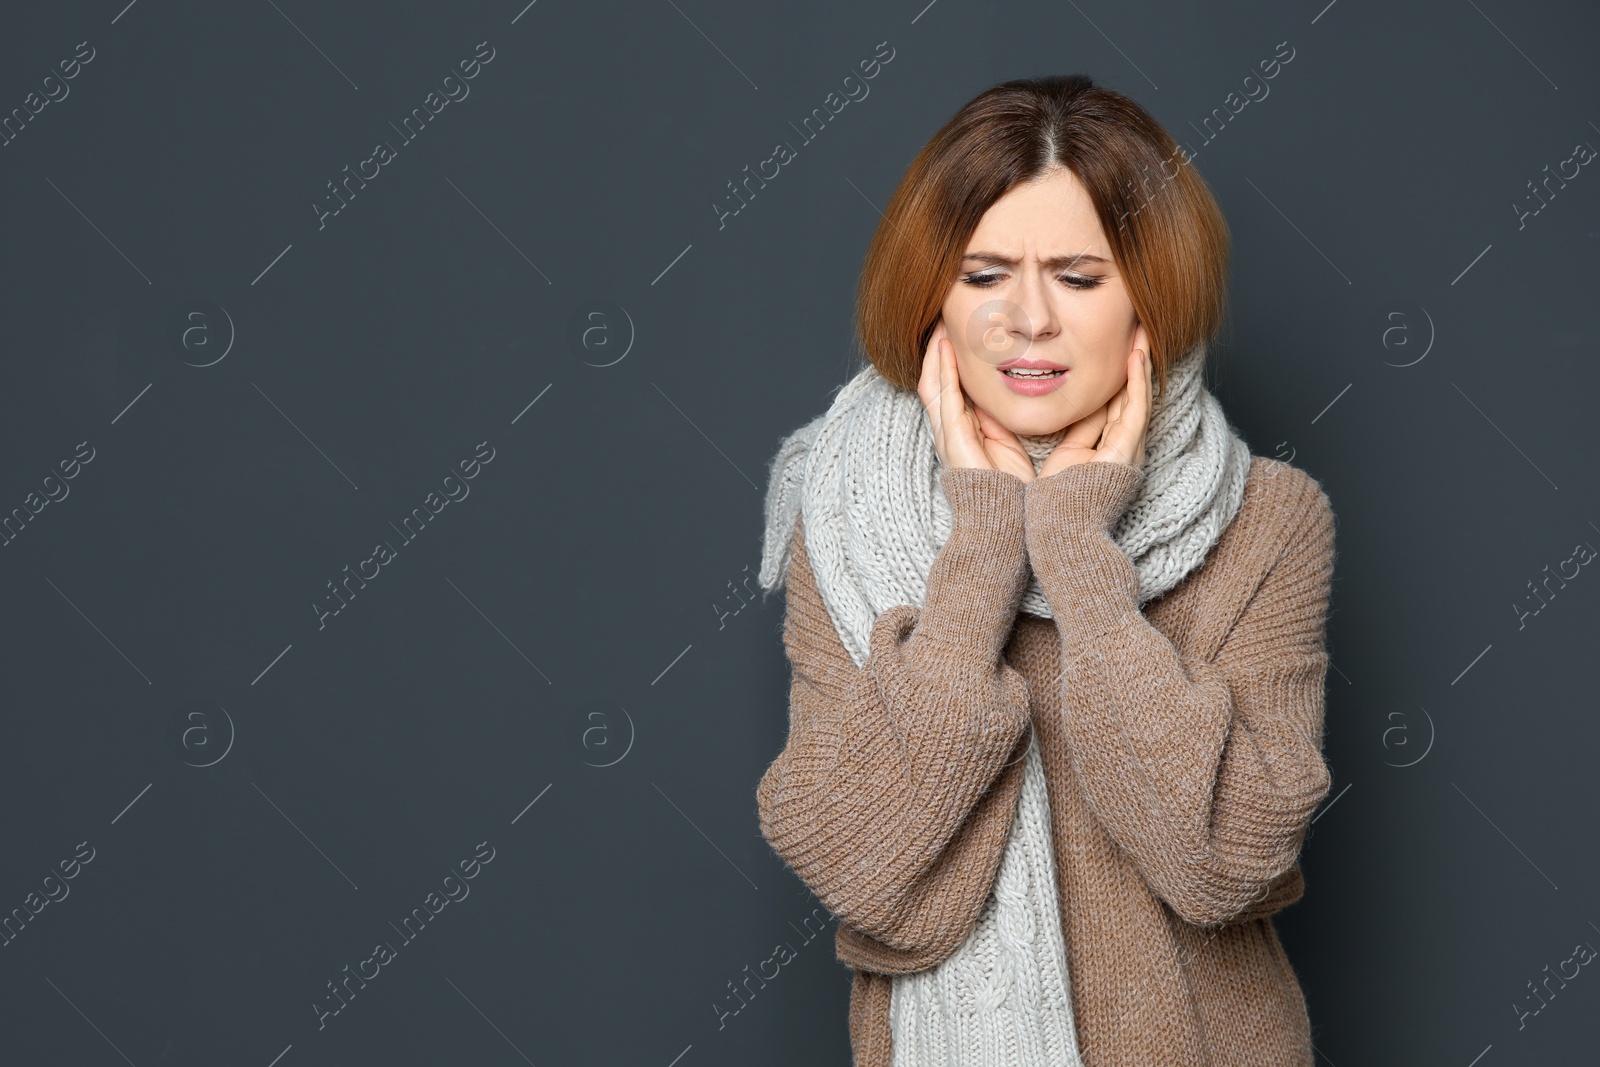 Photo of Woman suffering from cough on dark background. Space for text